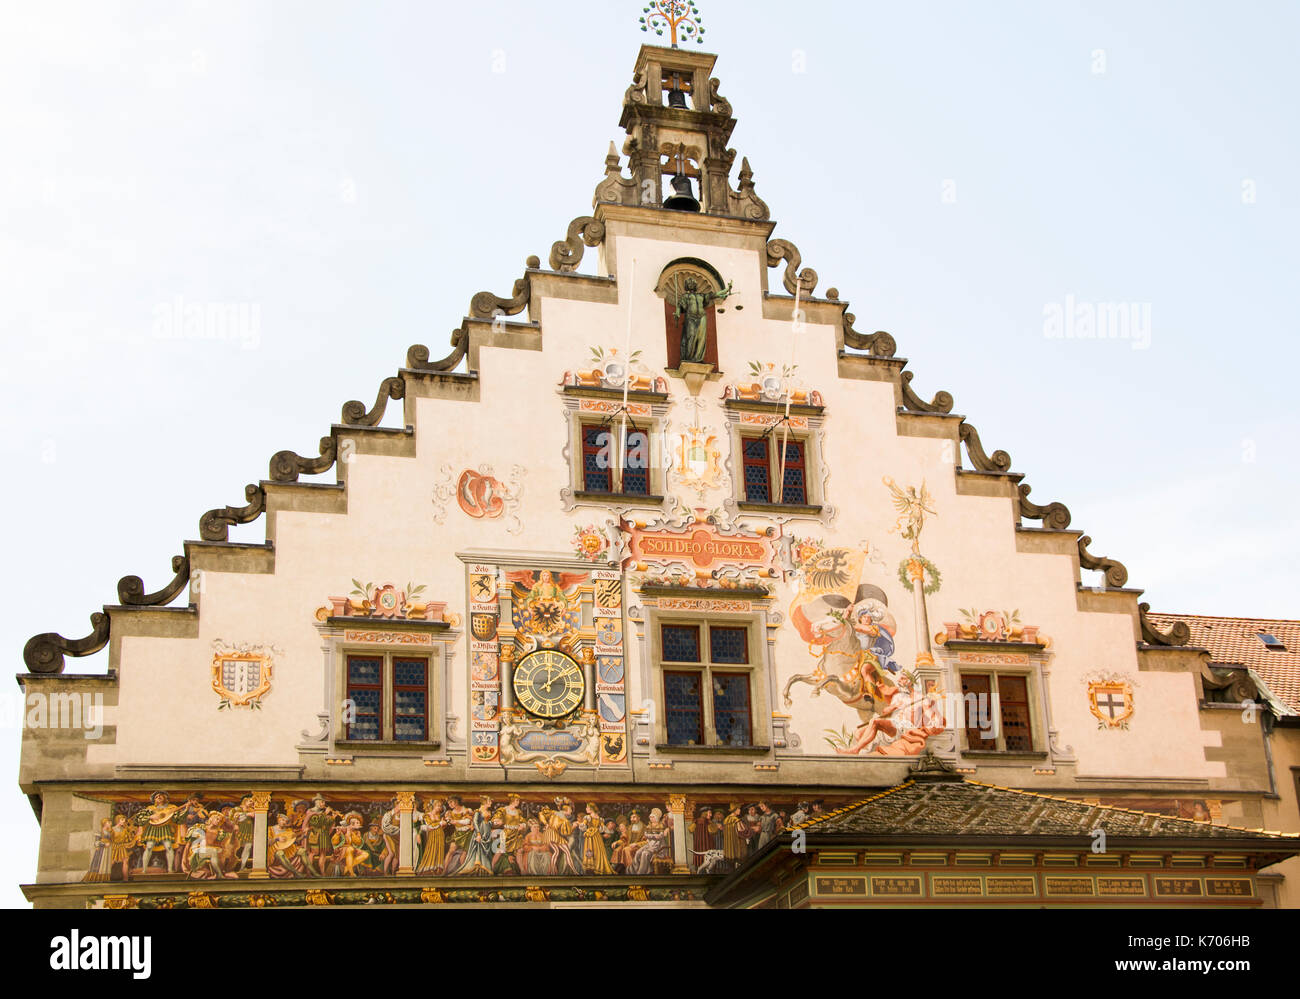 Detail of the 15th-century Alte Rathaus or Old Town Hall at Lindau on the Bodensee (Lake Constance), Germany Stock Photo